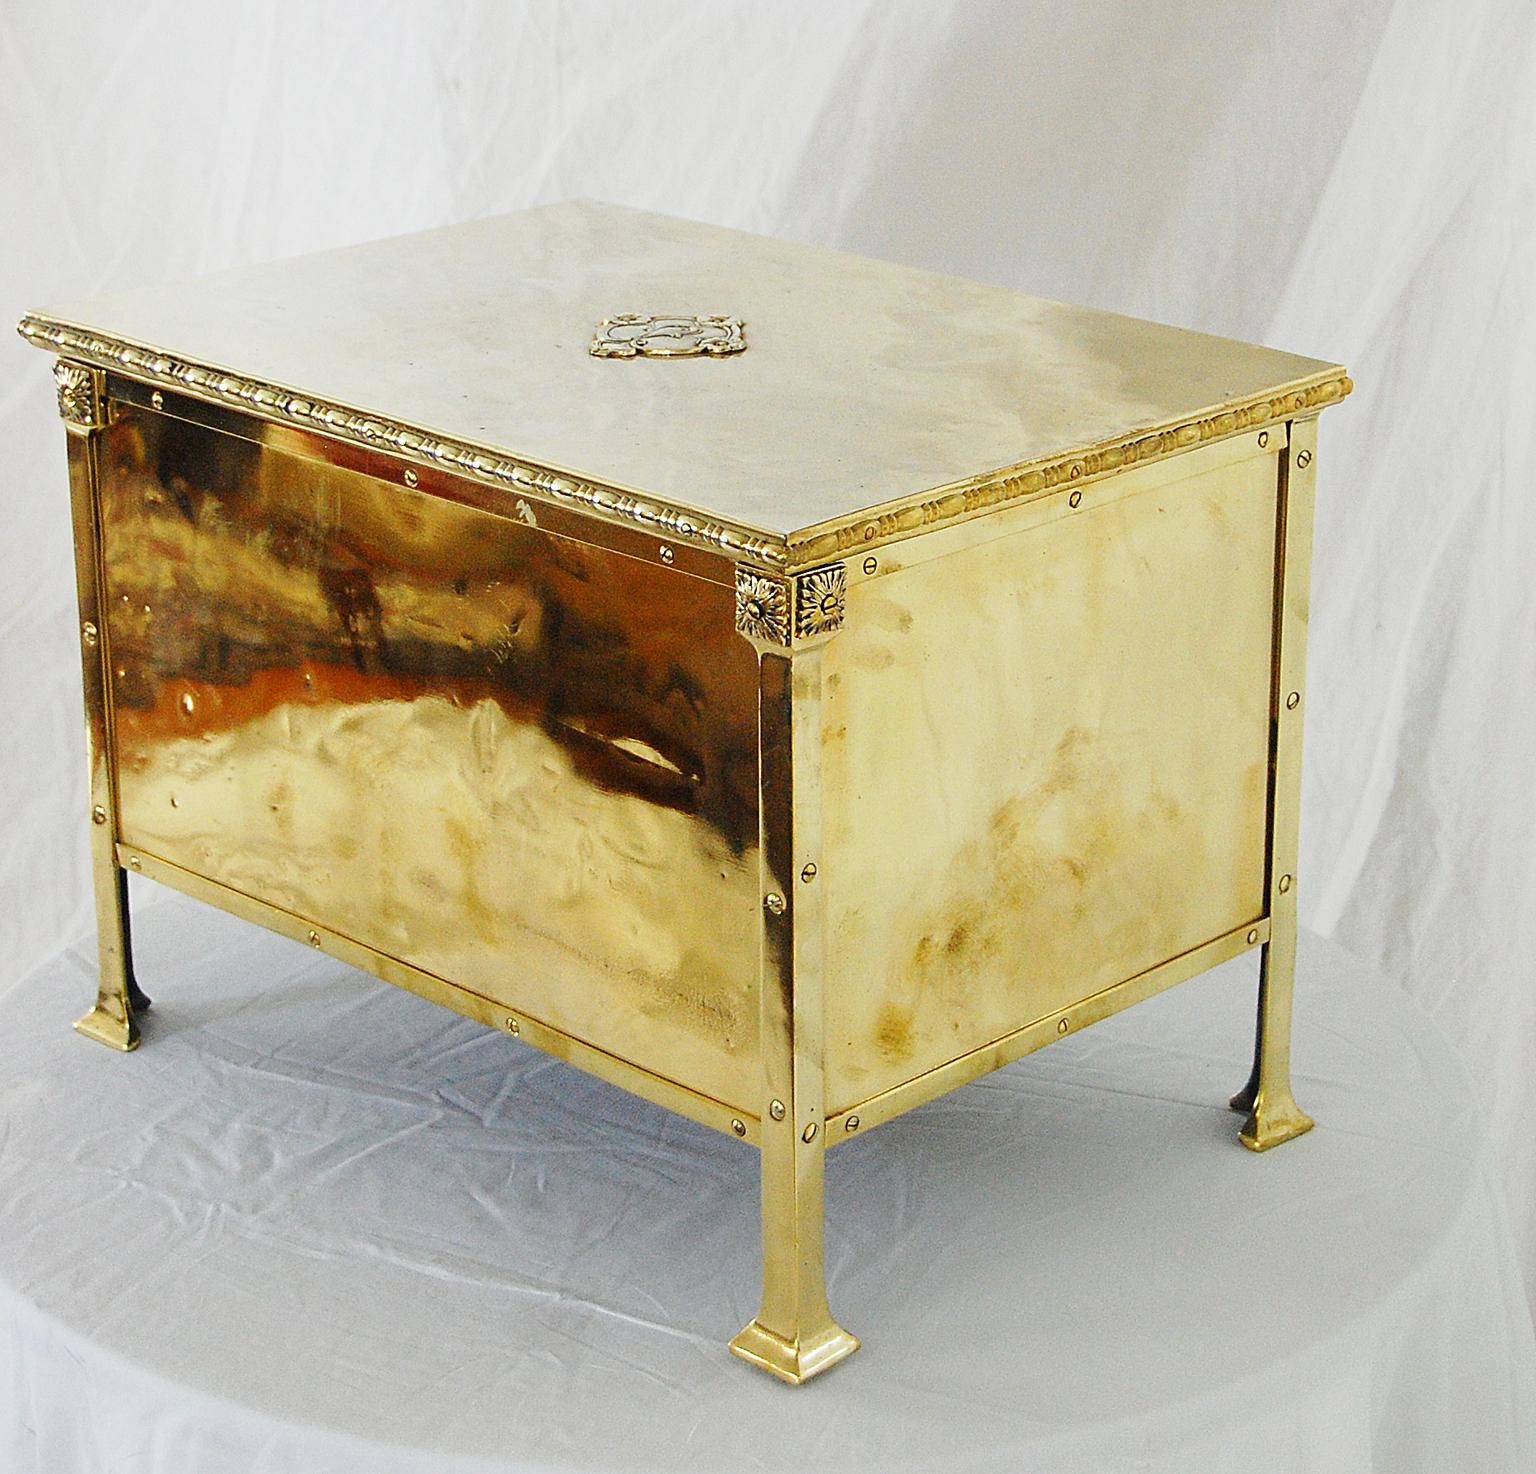 English Art Nouveau period brass log bin with hinged lid. This log bin has the high quality construction technique of overlaying the brass onto iron or wood. In this case the brass lid is overlaid on an iron base, while the base of the bin is